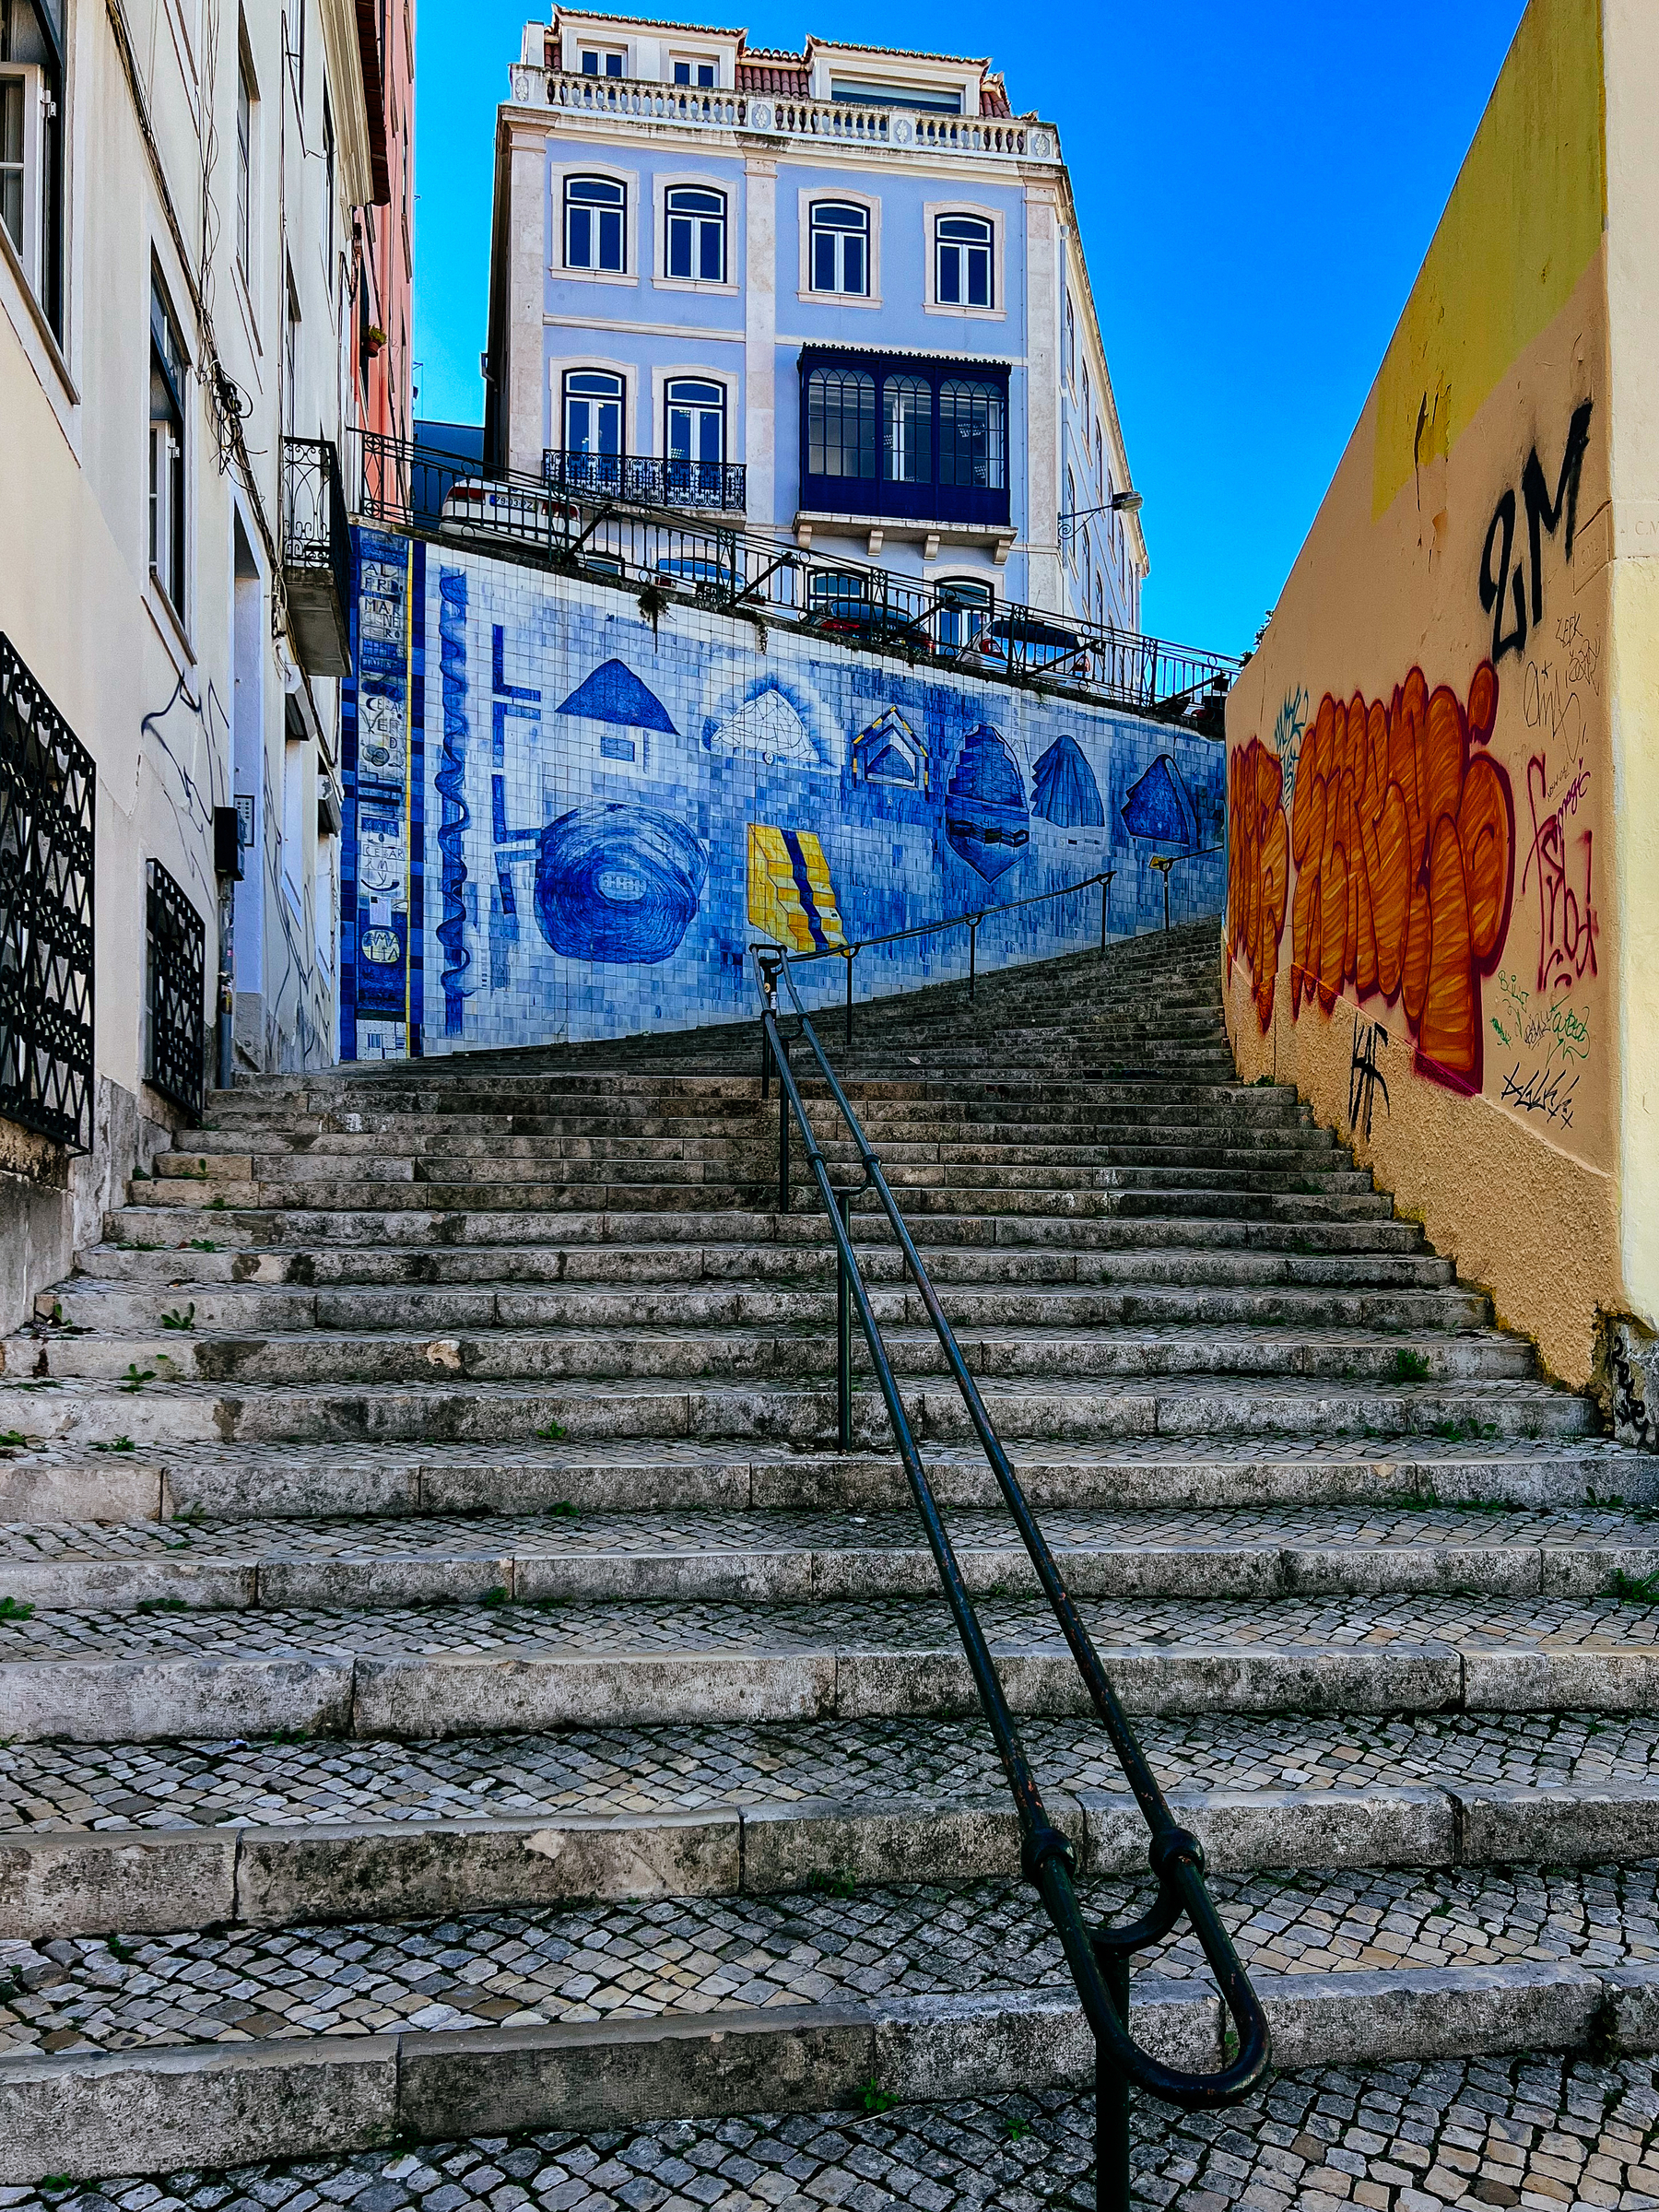 A stairway leading up to a tile panel, with a blue building higher up, on the background 